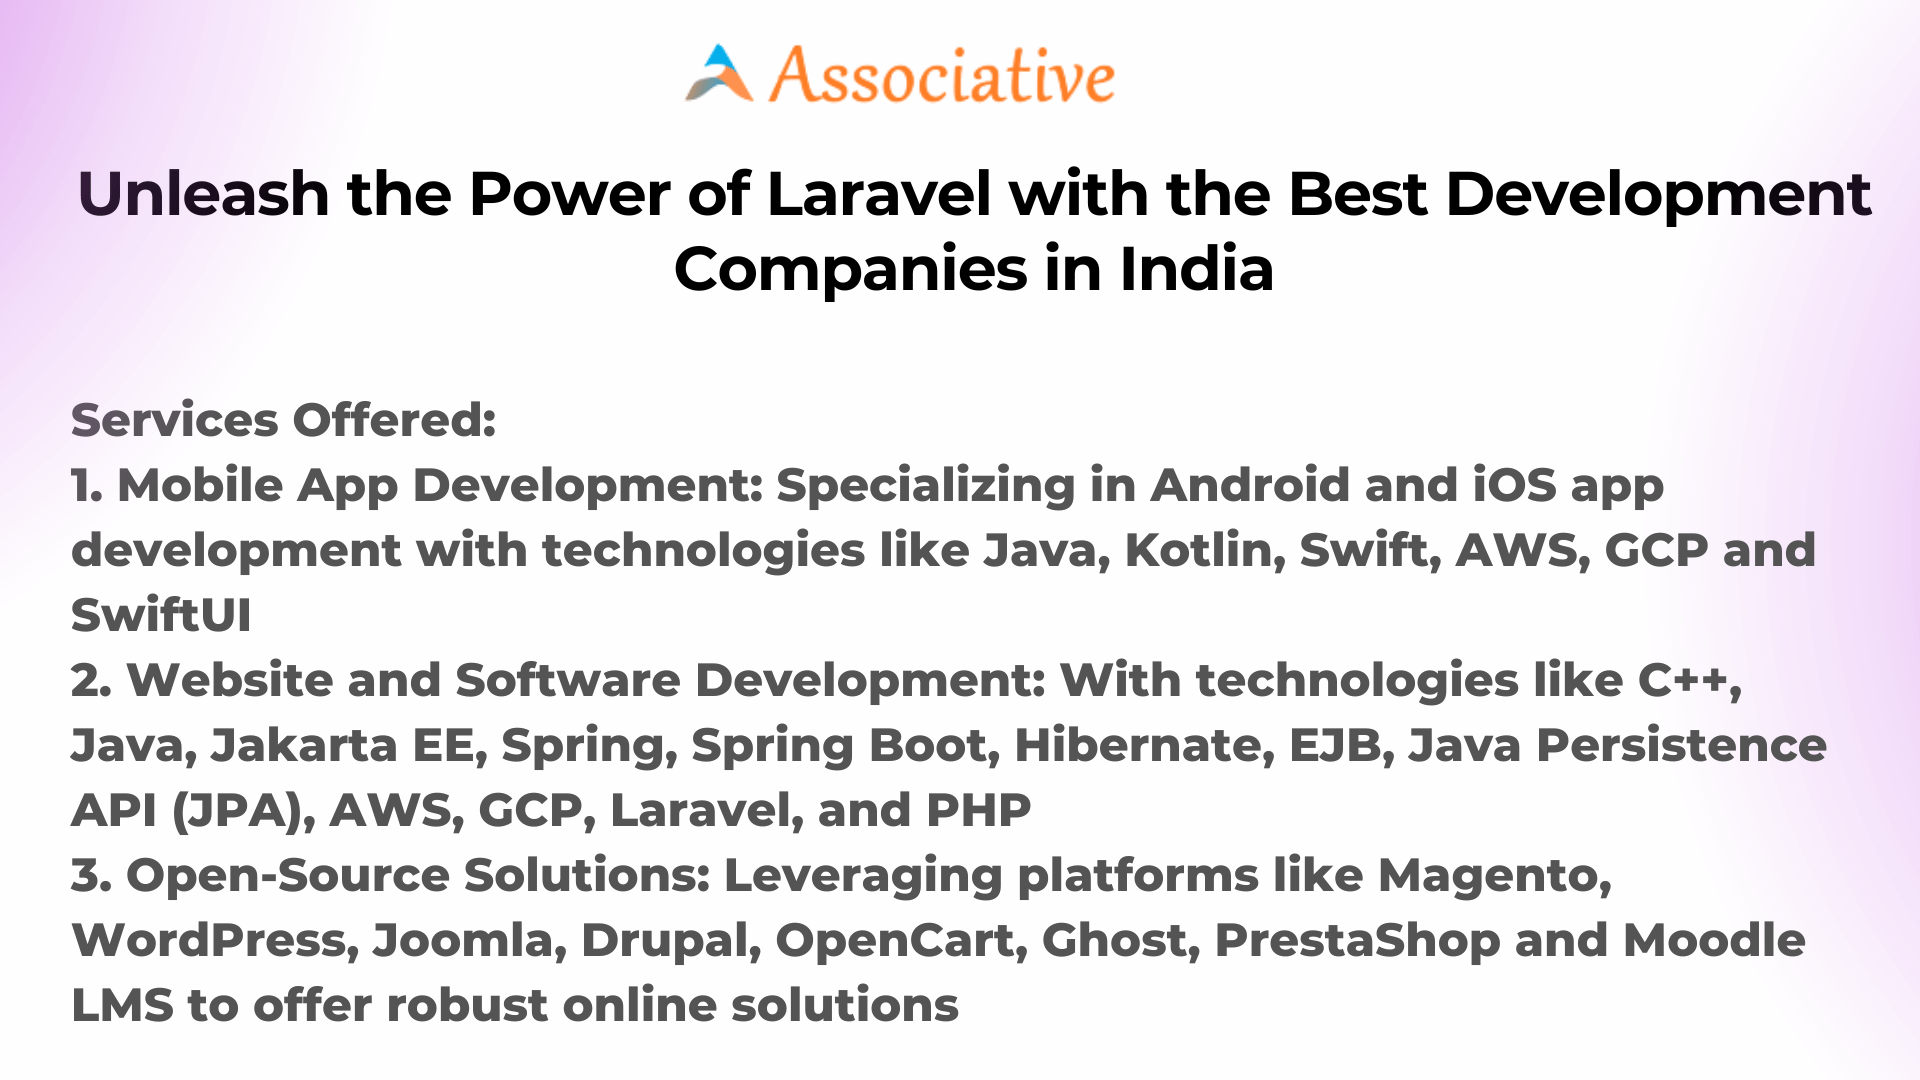 Unleash the Power of Laravel with the Best Development Companies in India